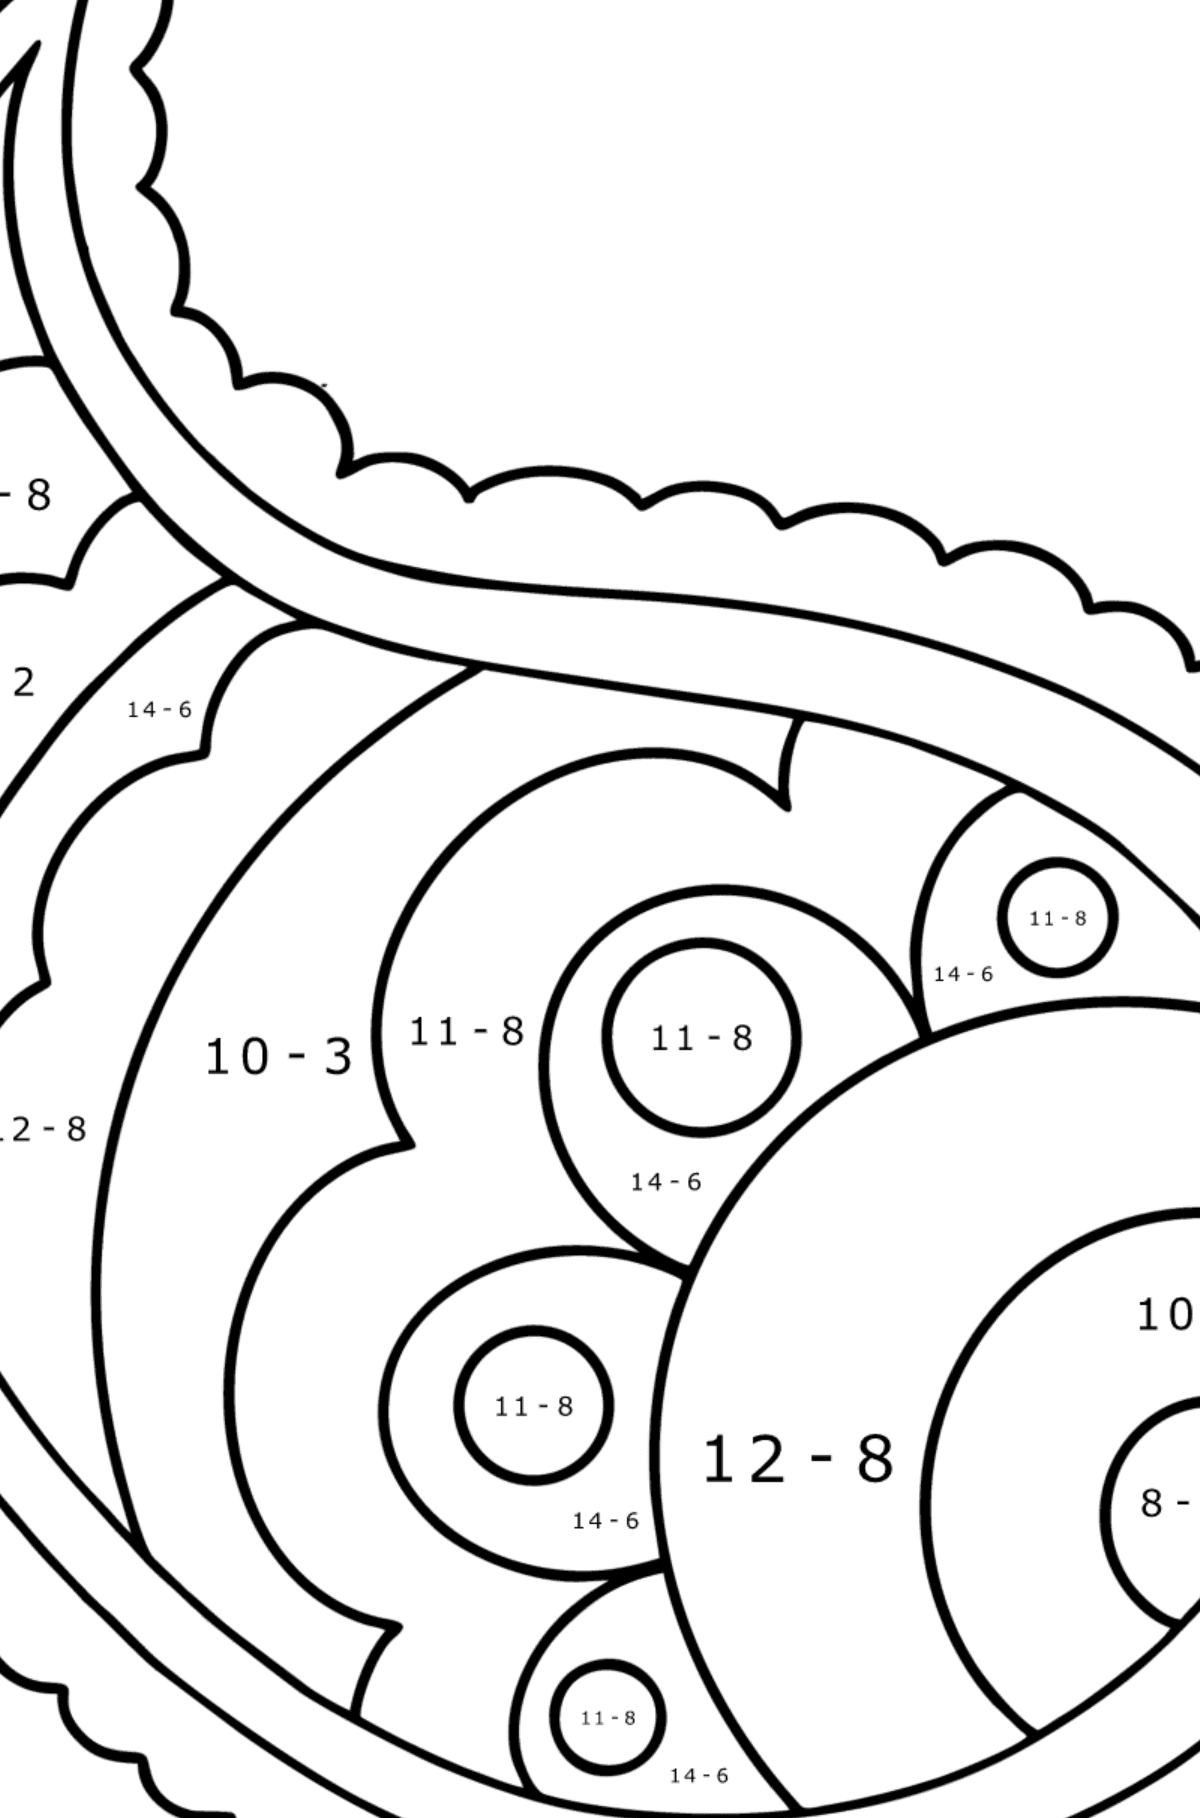 Paisley coloring page - 17 Elements - Math Coloring - Subtraction for Kids